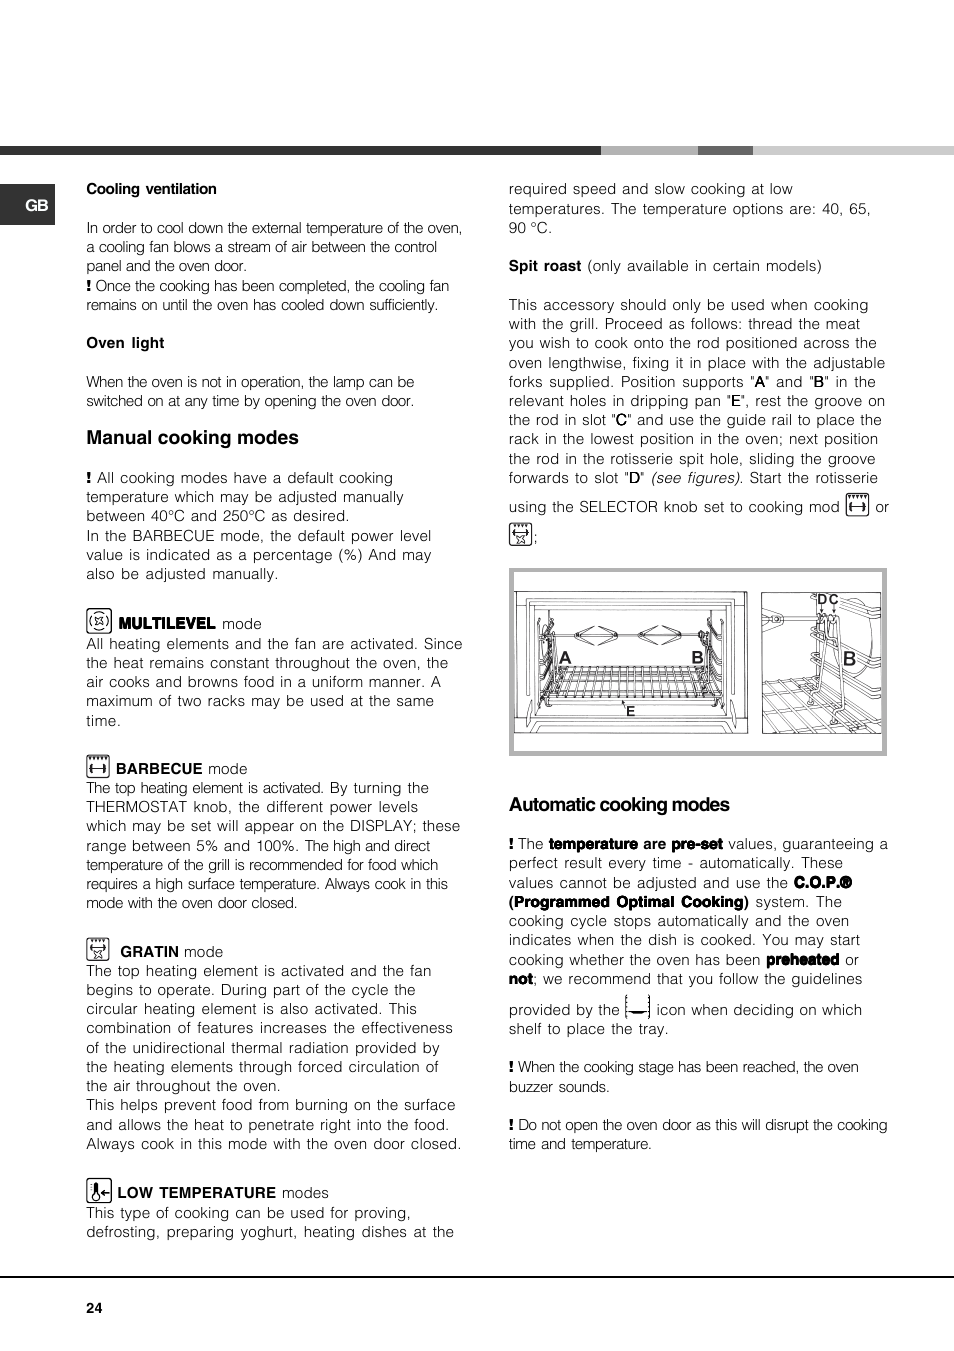 Automatic cooking modes, Manual cooking modes | Hotpoint Ariston CP97SEA-HA  User Manual | Page 24 / 76 | Original mode